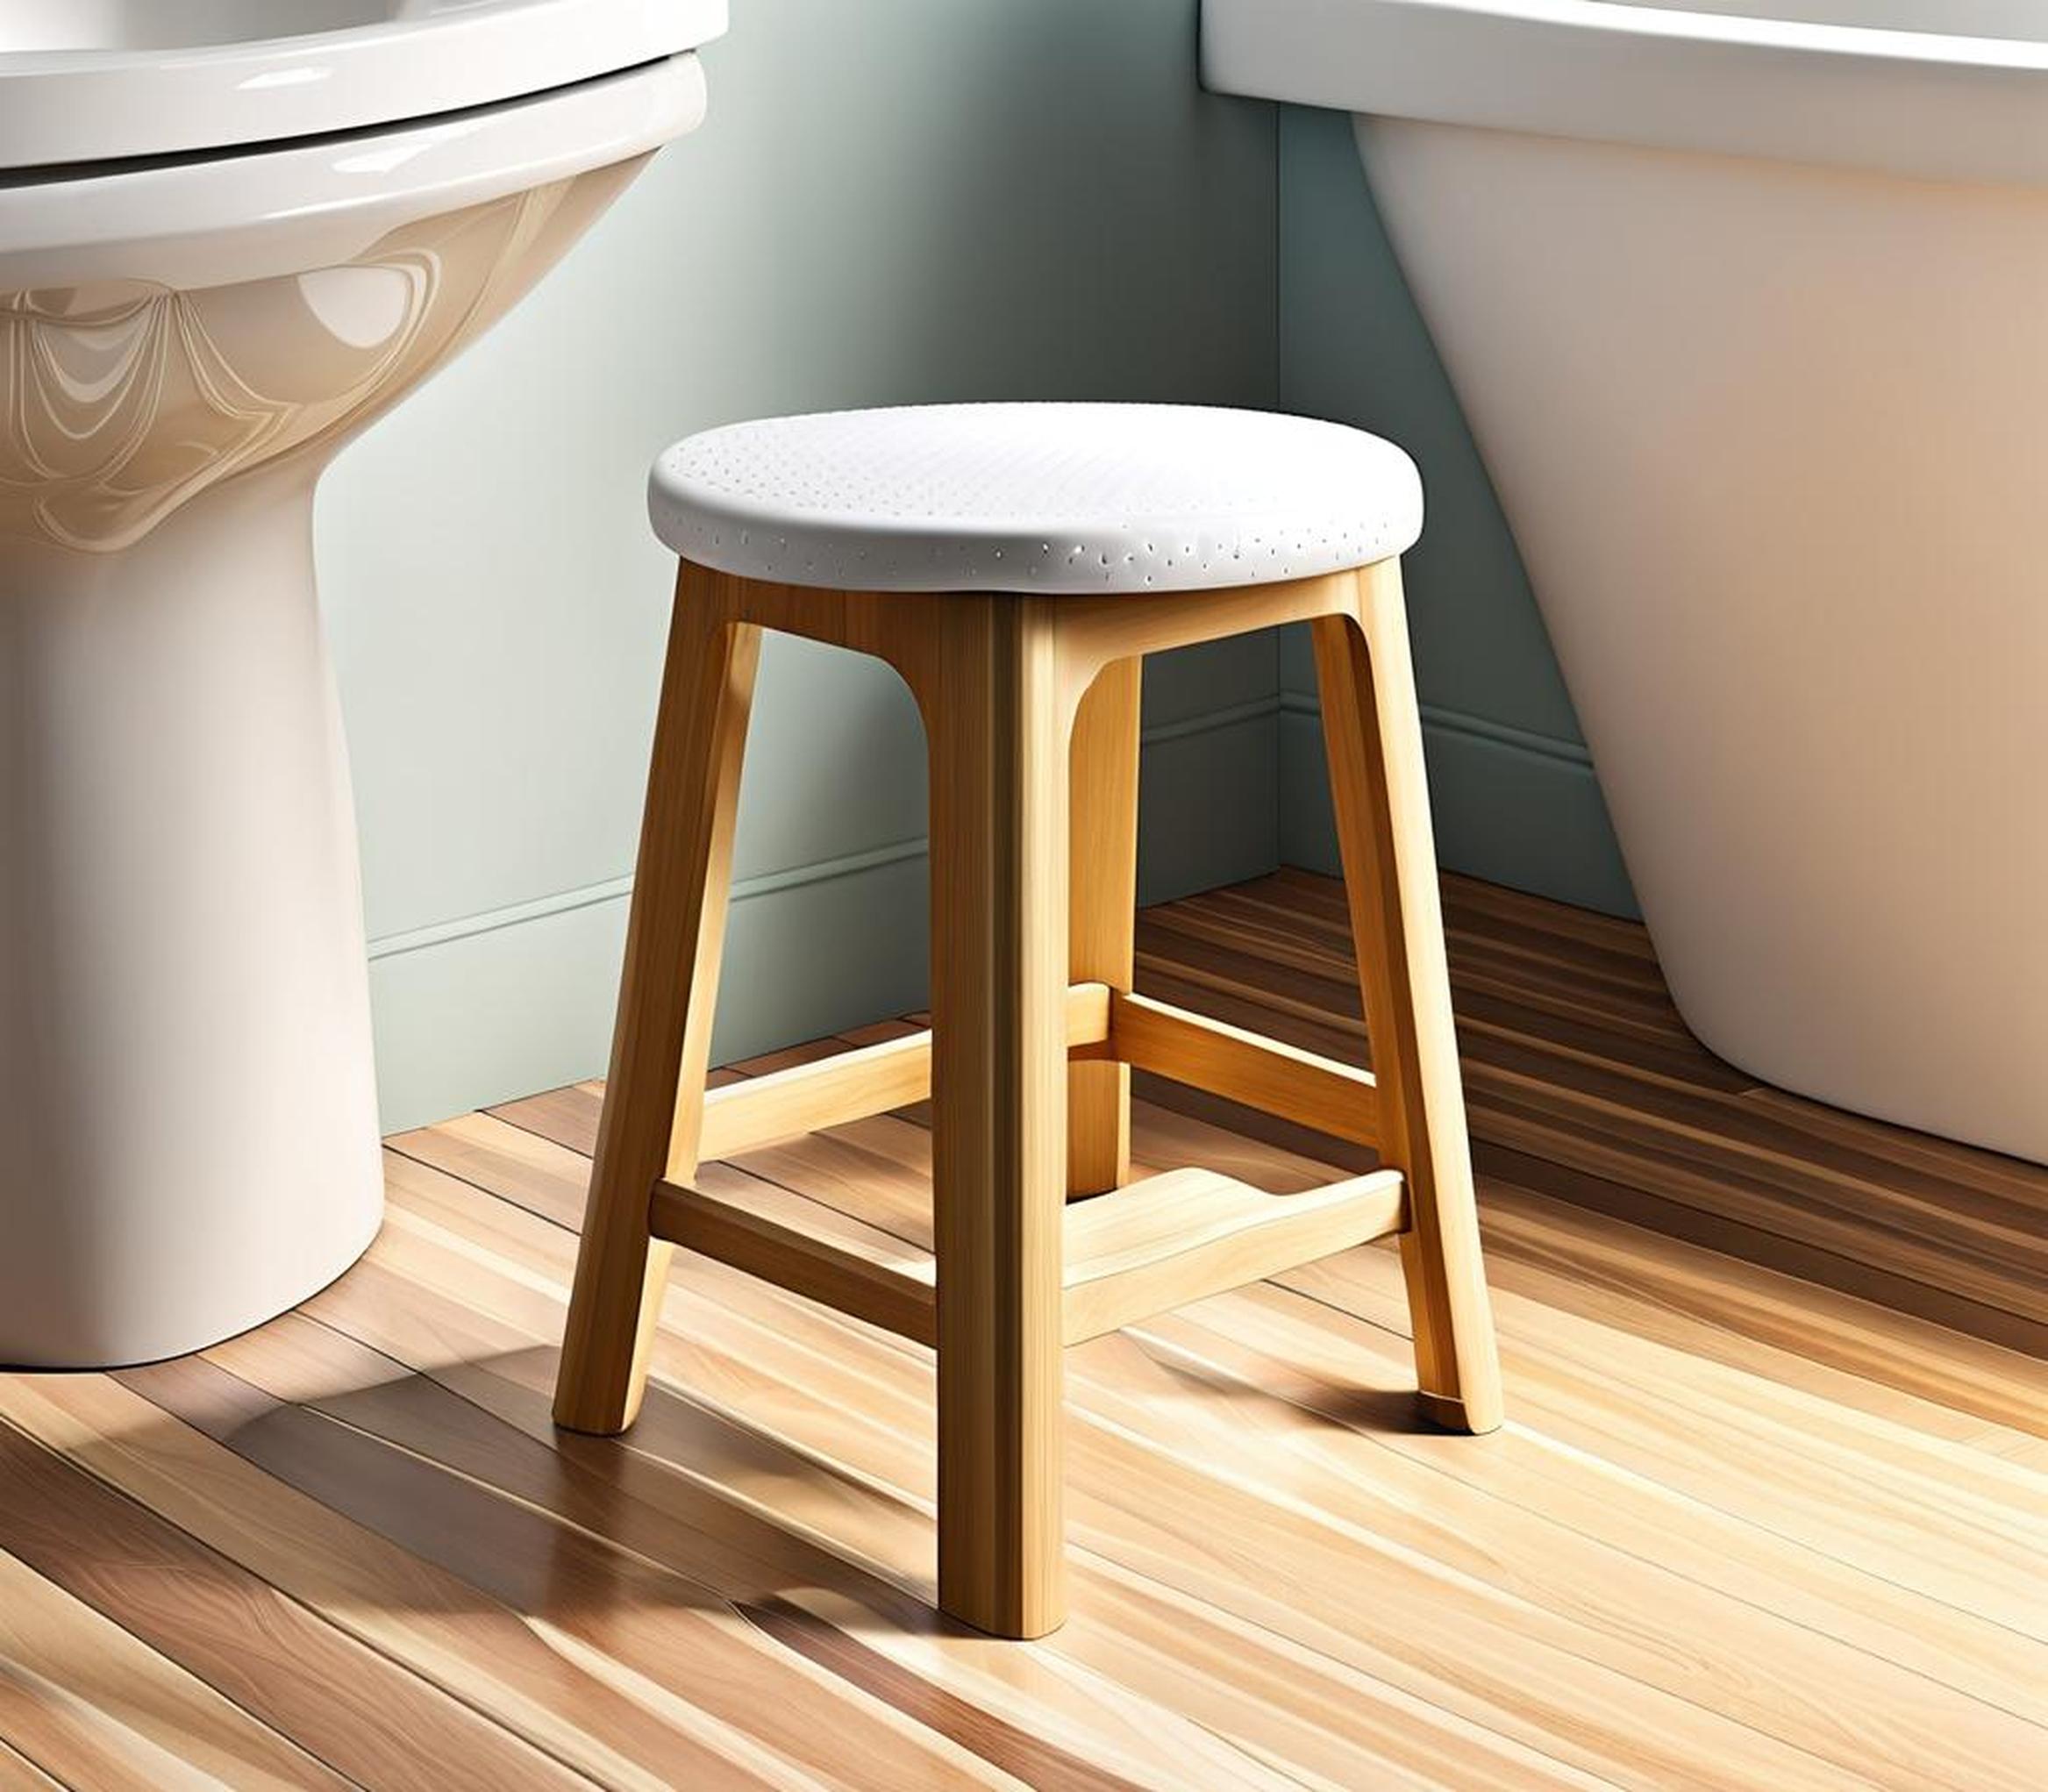 Shower Stool Features That Provide Extra Stability and Support